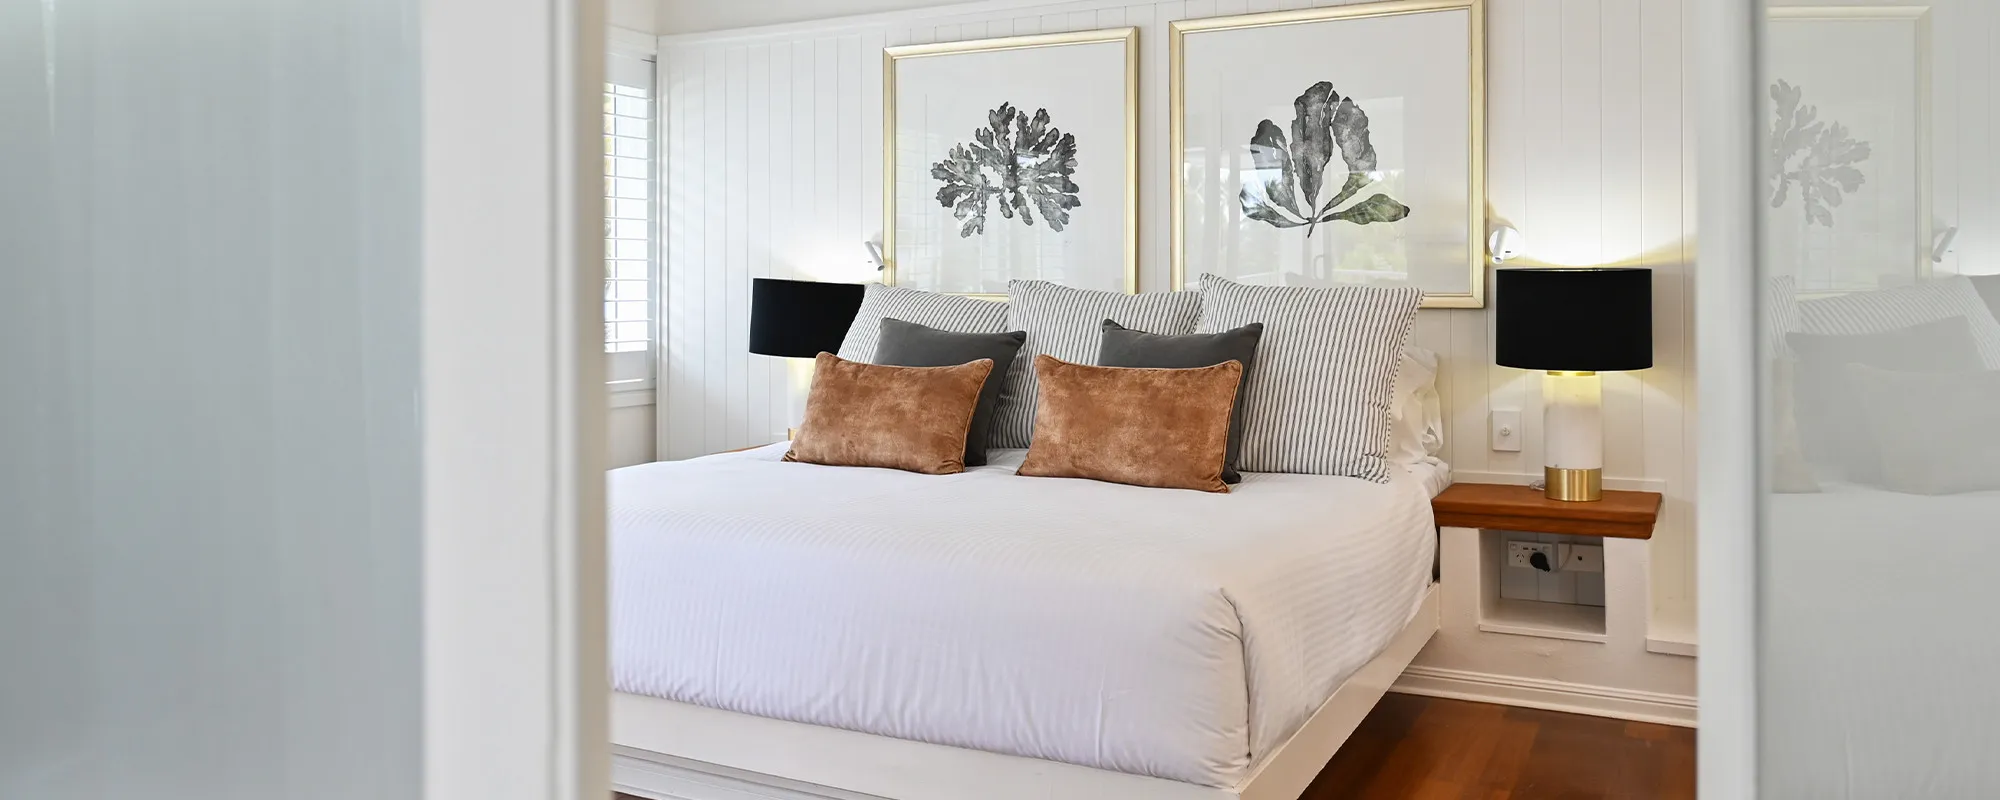 Alamanda Palm Cove by Lancemore Boutique Luxury Accommodation Four Bedroom Apartment 2000 x 800 9 v2